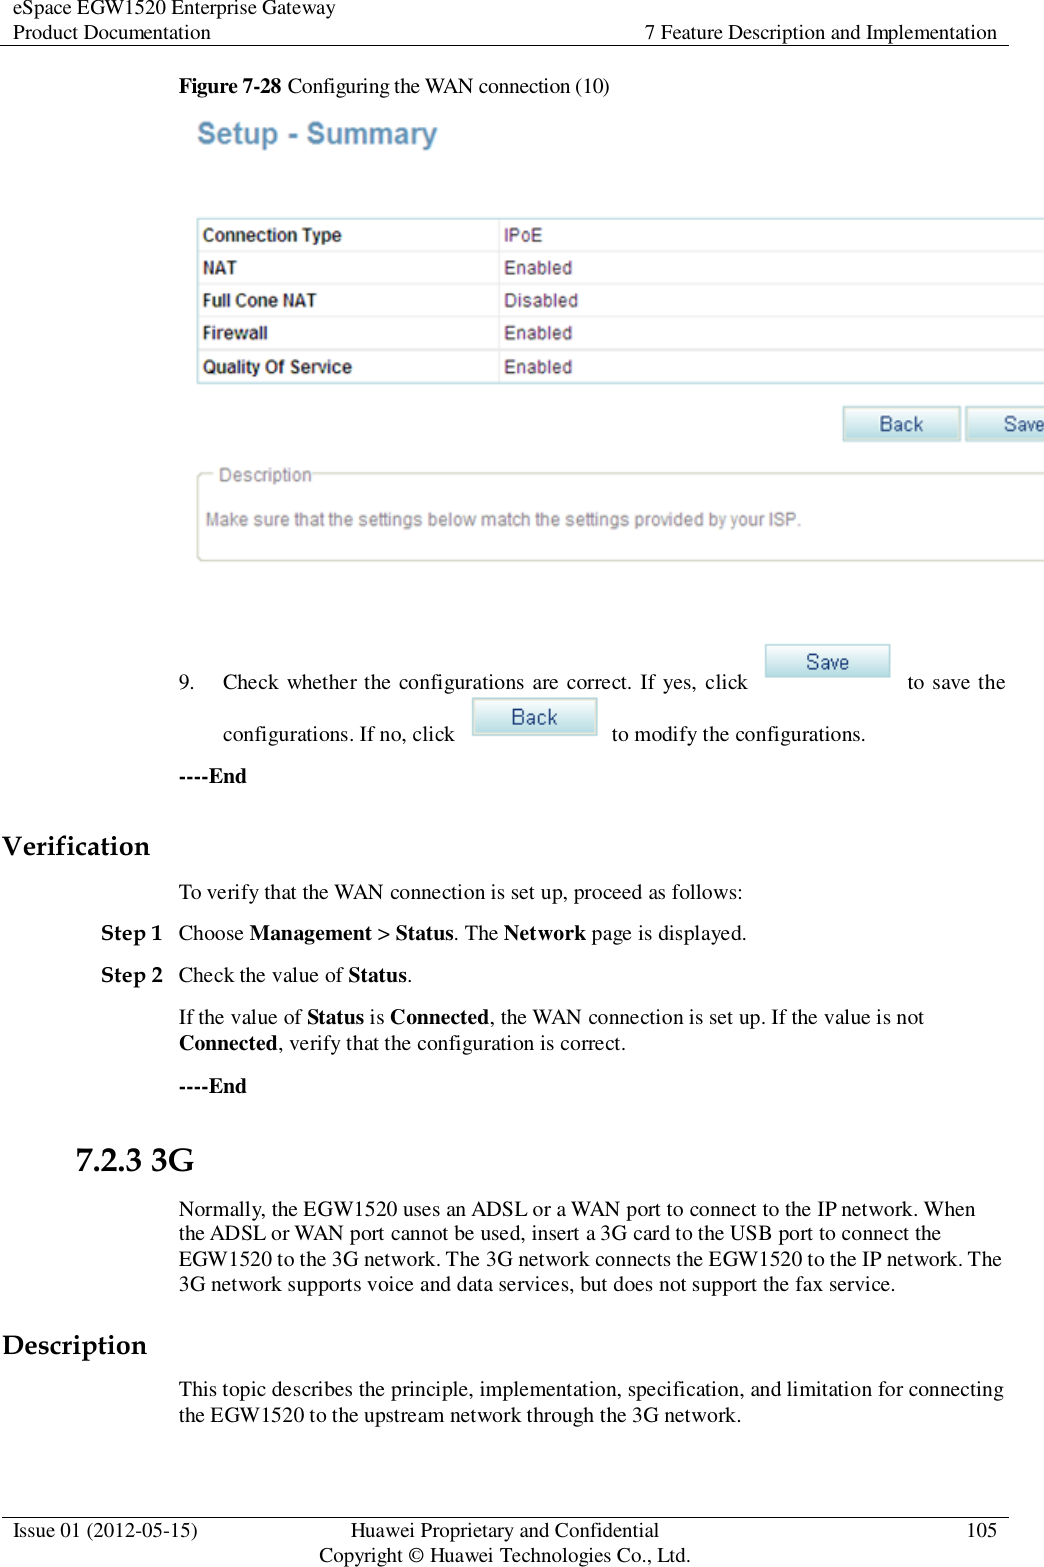 eSpace EGW1520 Enterprise Gateway Product Documentation 7 Feature Description and Implementation  Issue 01 (2012-05-15) Huawei Proprietary and Confidential                                     Copyright © Huawei Technologies Co., Ltd. 105  Figure 7-28 Configuring the WAN connection (10)   9. Check whether the configurations are correct. If yes, click    to save the configurations. If no, click    to modify the configurations. ----End Verification To verify that the WAN connection is set up, proceed as follows: Step 1 Choose Management &gt; Status. The Network page is displayed. Step 2 Check the value of Status. If the value of Status is Connected, the WAN connection is set up. If the value is not Connected, verify that the configuration is correct. ----End 7.2.3 3G Normally, the EGW1520 uses an ADSL or a WAN port to connect to the IP network. When the ADSL or WAN port cannot be used, insert a 3G card to the USB port to connect the EGW1520 to the 3G network. The 3G network connects the EGW1520 to the IP network. The 3G network supports voice and data services, but does not support the fax service. Description This topic describes the principle, implementation, specification, and limitation for connecting the EGW1520 to the upstream network through the 3G network. 